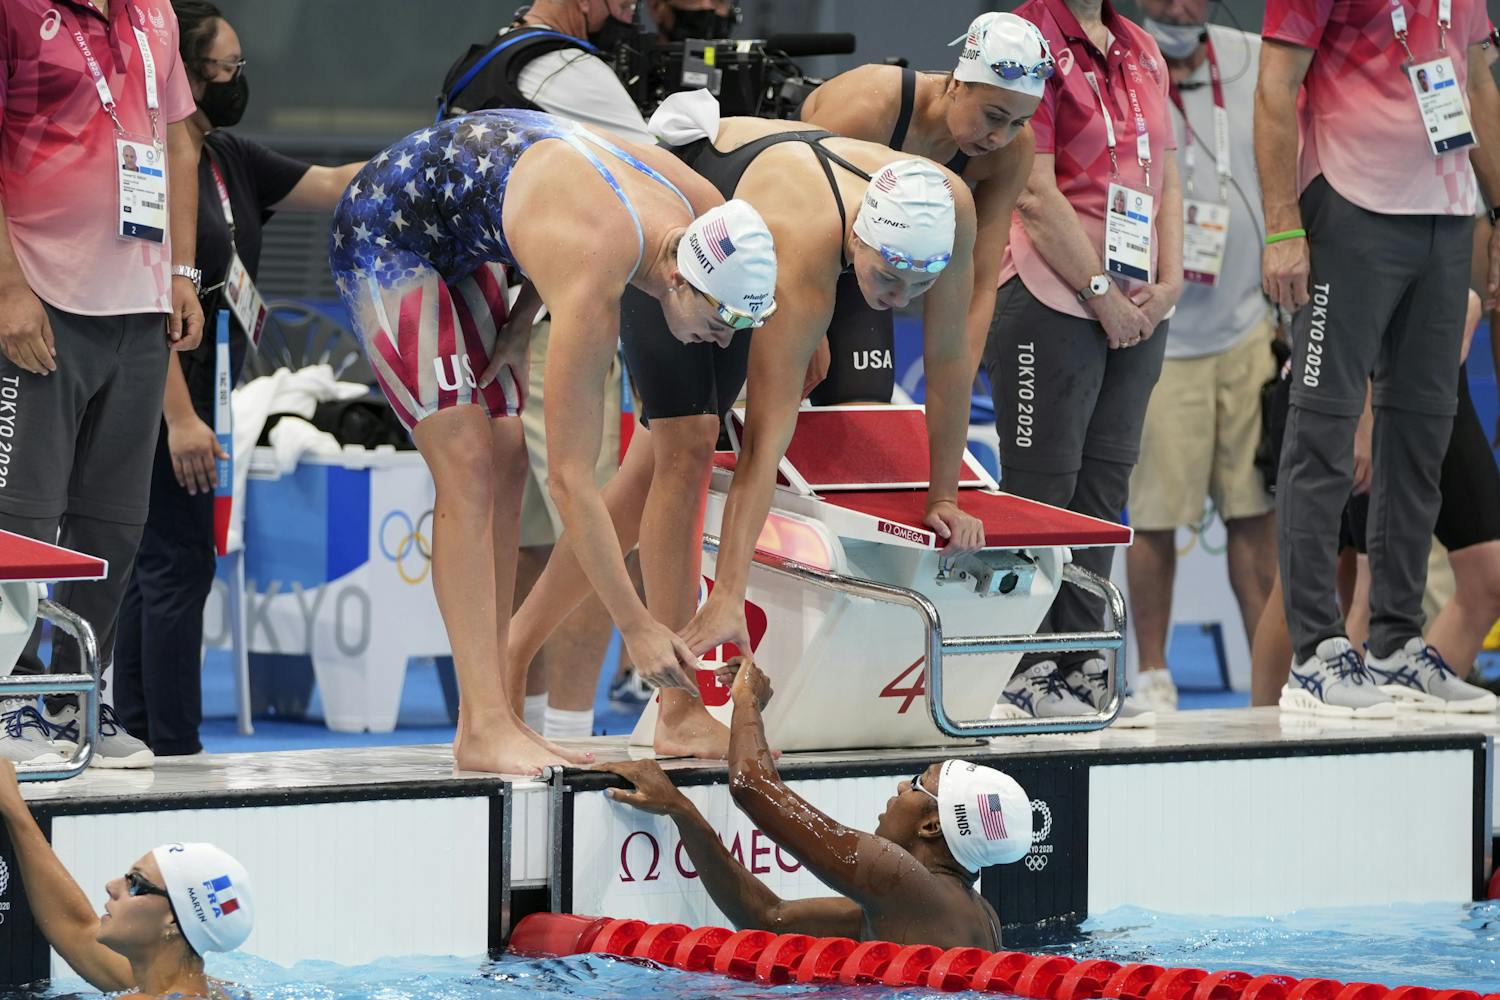 Natalie Hinds, bottom, of the United States is congratulated by teammates after swimming the fourth leg during a preliminary round of the women's 4x100m freestyle relay at the 2020 Summer Olympics, Saturday, July 24, 2021, in Tokyo, Japan. (AP Photo/Matthias Schrader)